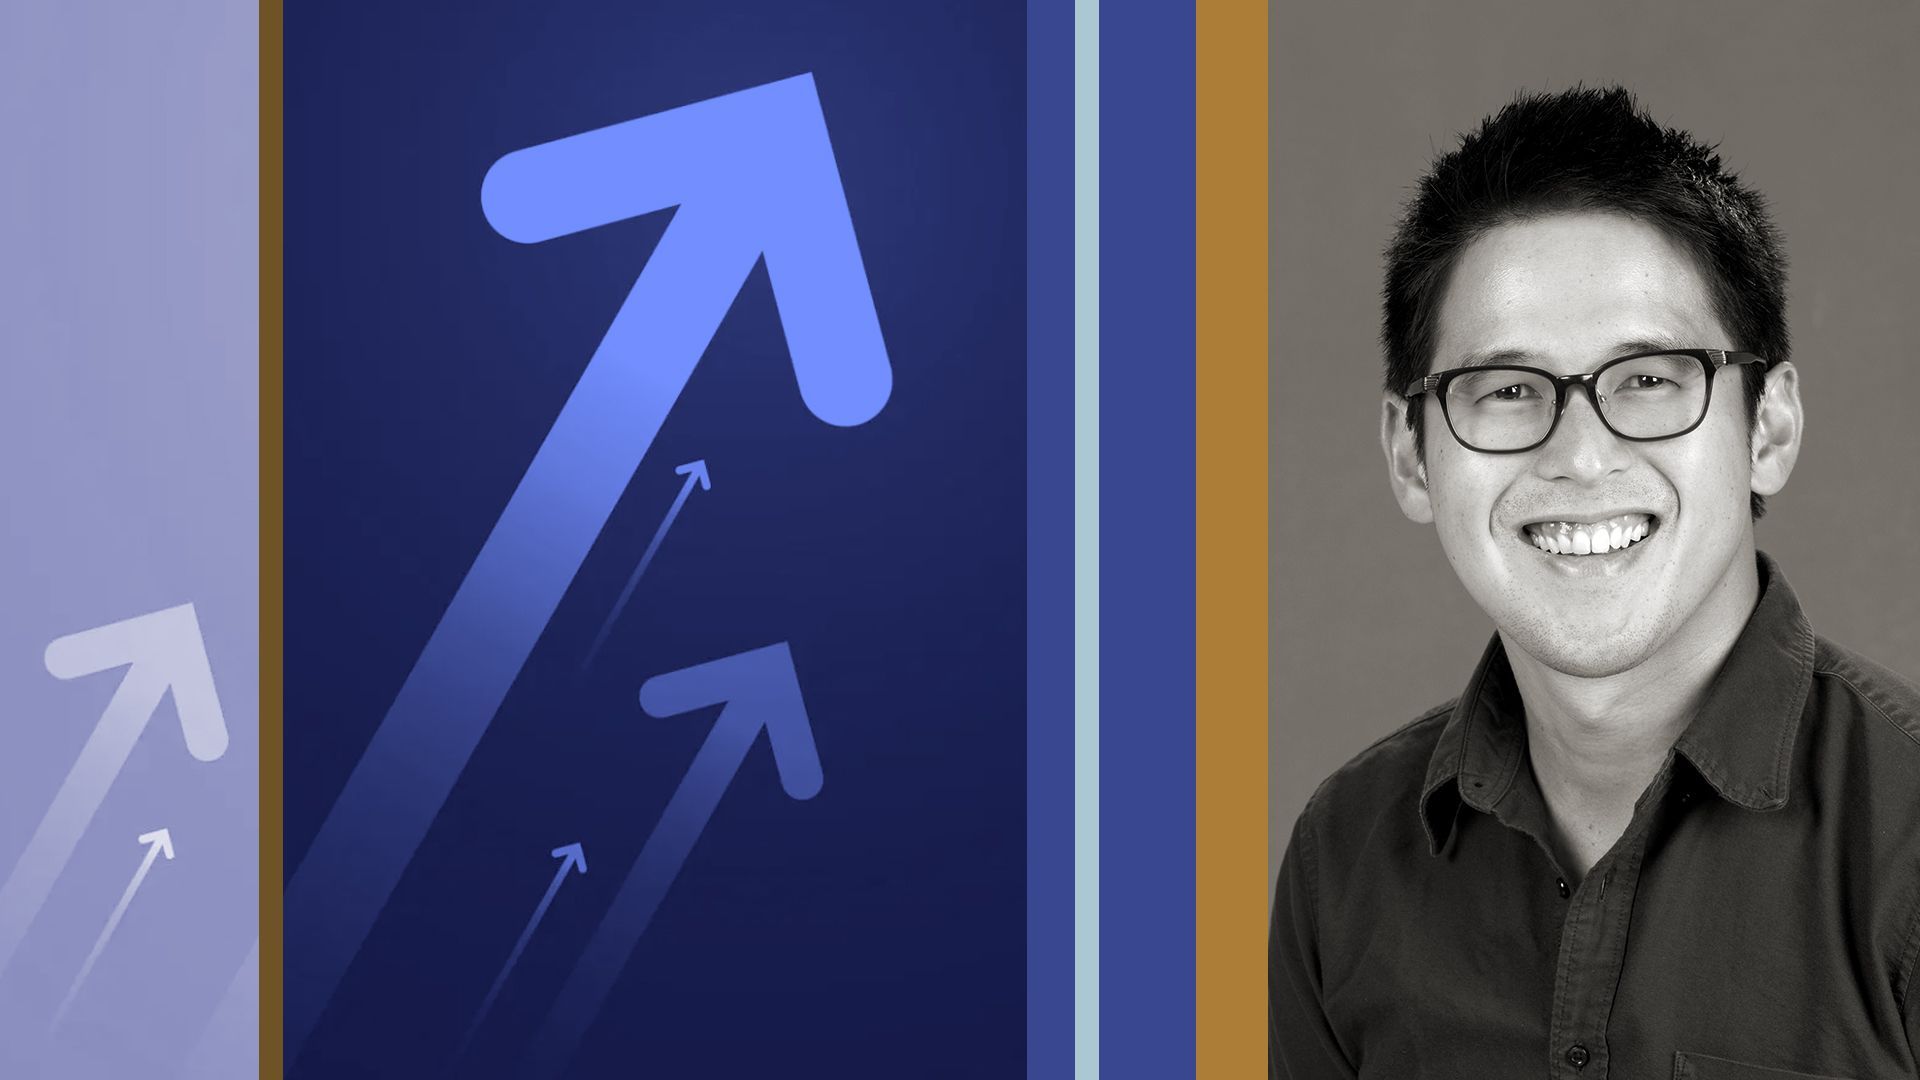 Photo illustration of TX Zhou, general partner at Fika Ventures, with upward arrows and abstract shapes.